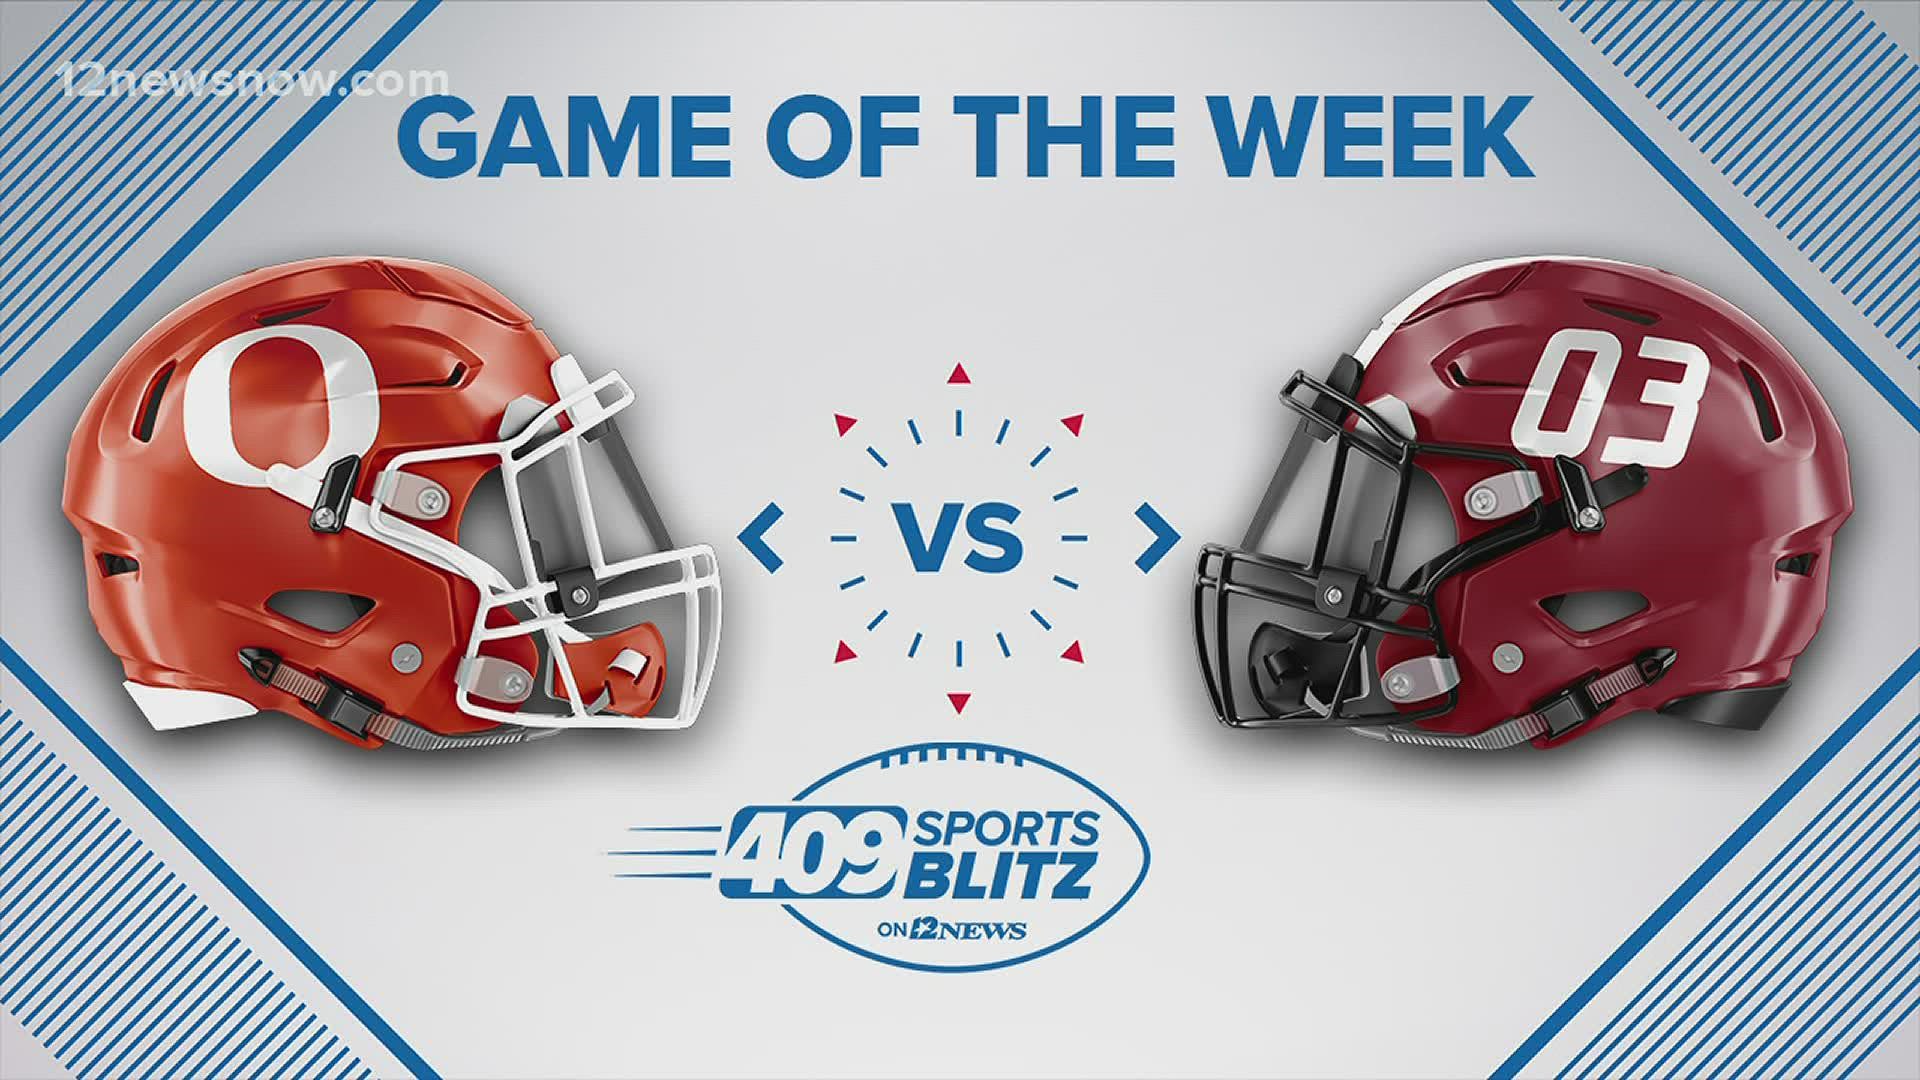 Rivals Bridge City and Orangefield to meet in the 409Sports Blitz Game of The Week